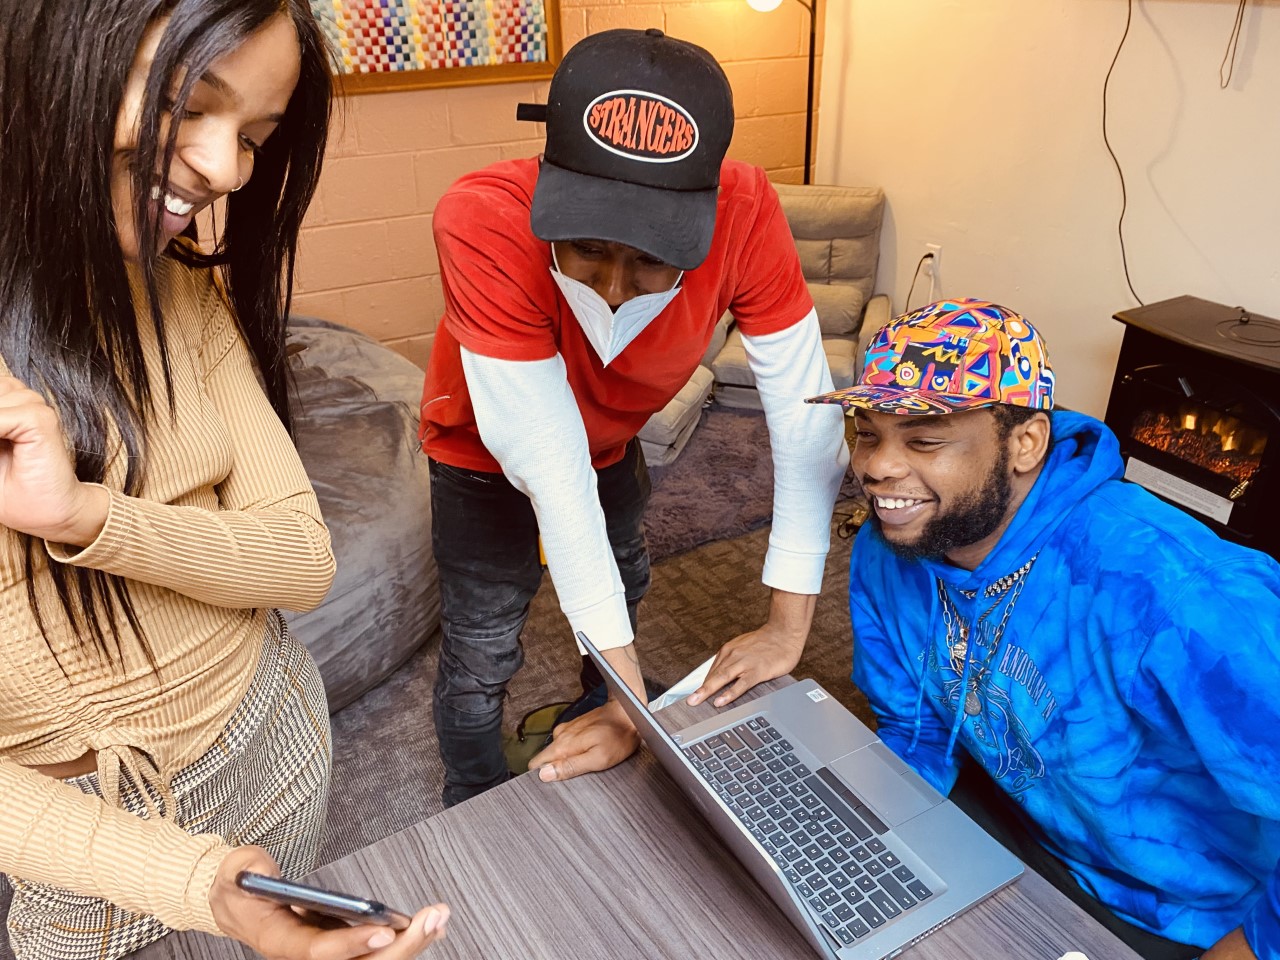 Three young people look at a phone and laptop.